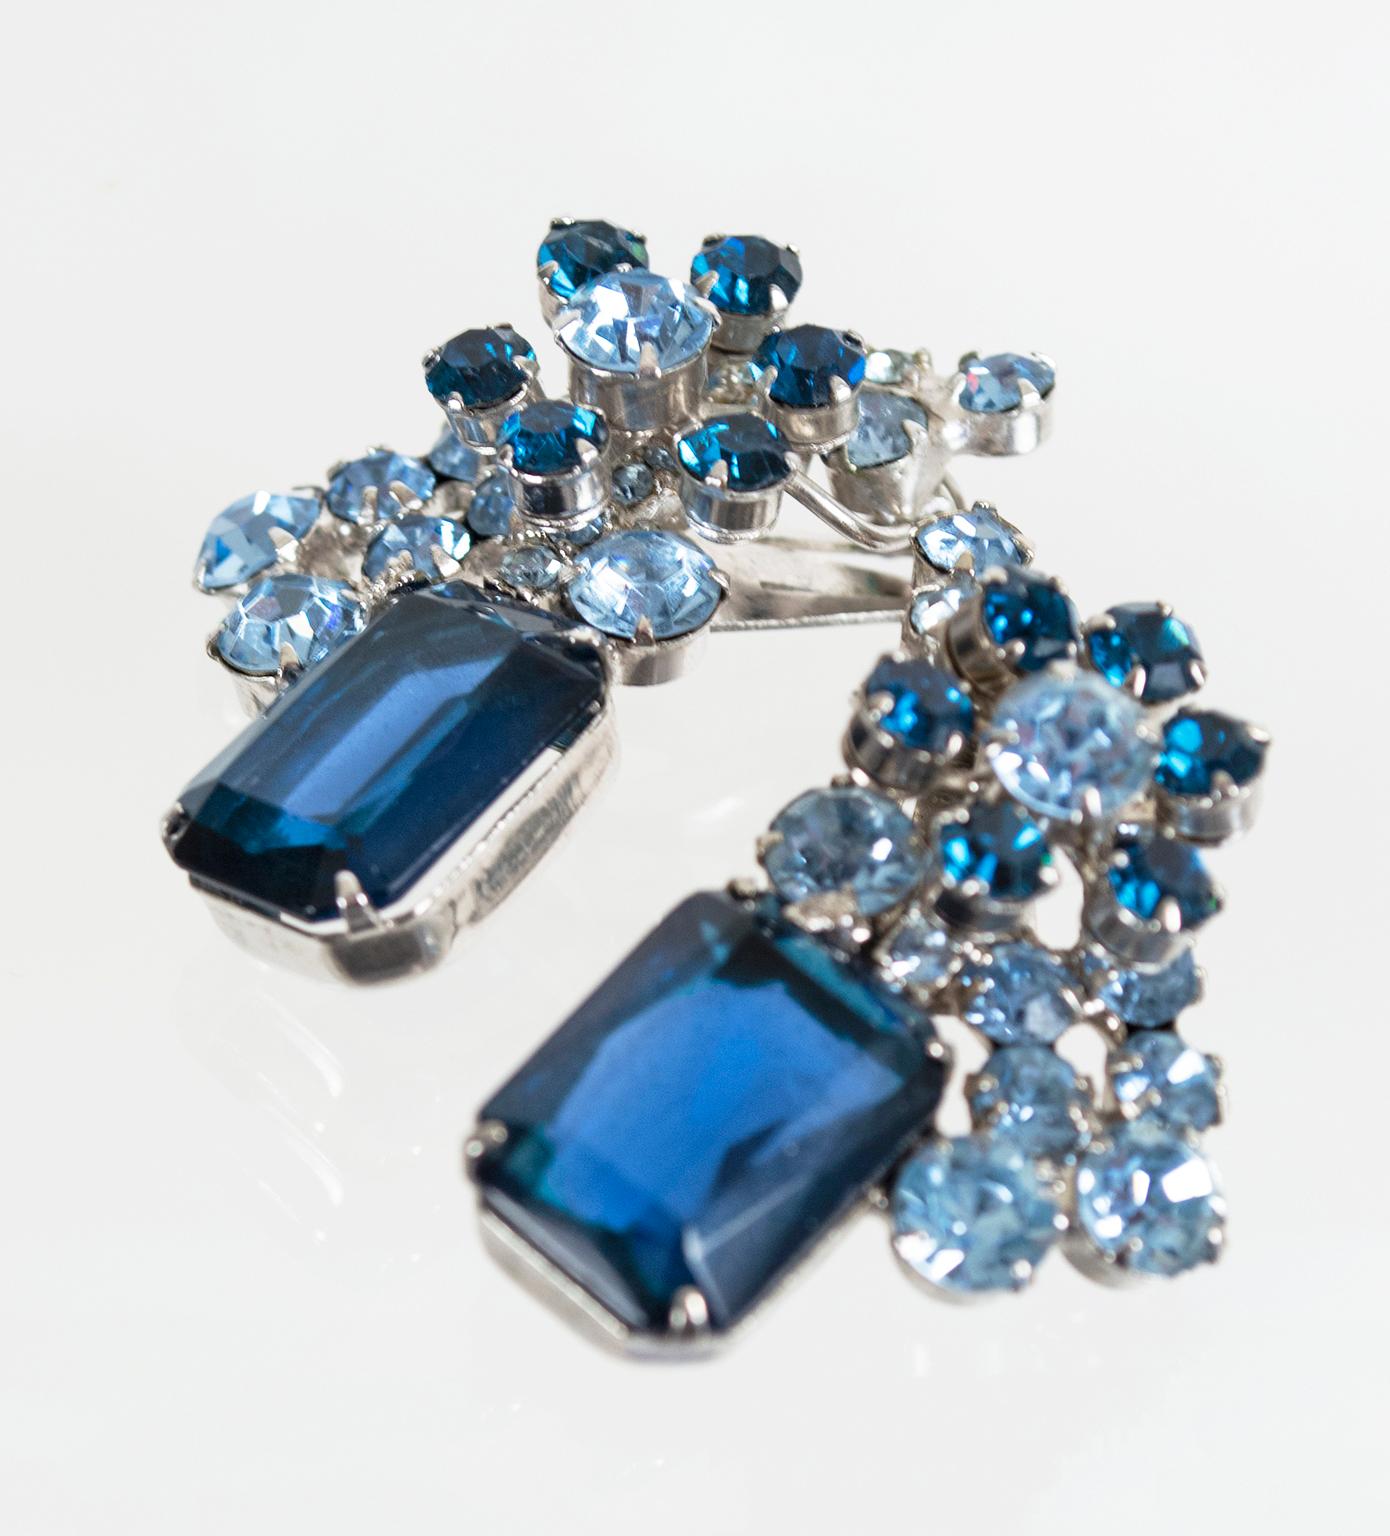 Though it is over a half century old, this exquisite earring and brooch set is as chunky, relevant and wearable as any modern costume jewelry. Fiery and brilliant, their centerpieces are their single emerald-cut crystals, which resemble Cartier